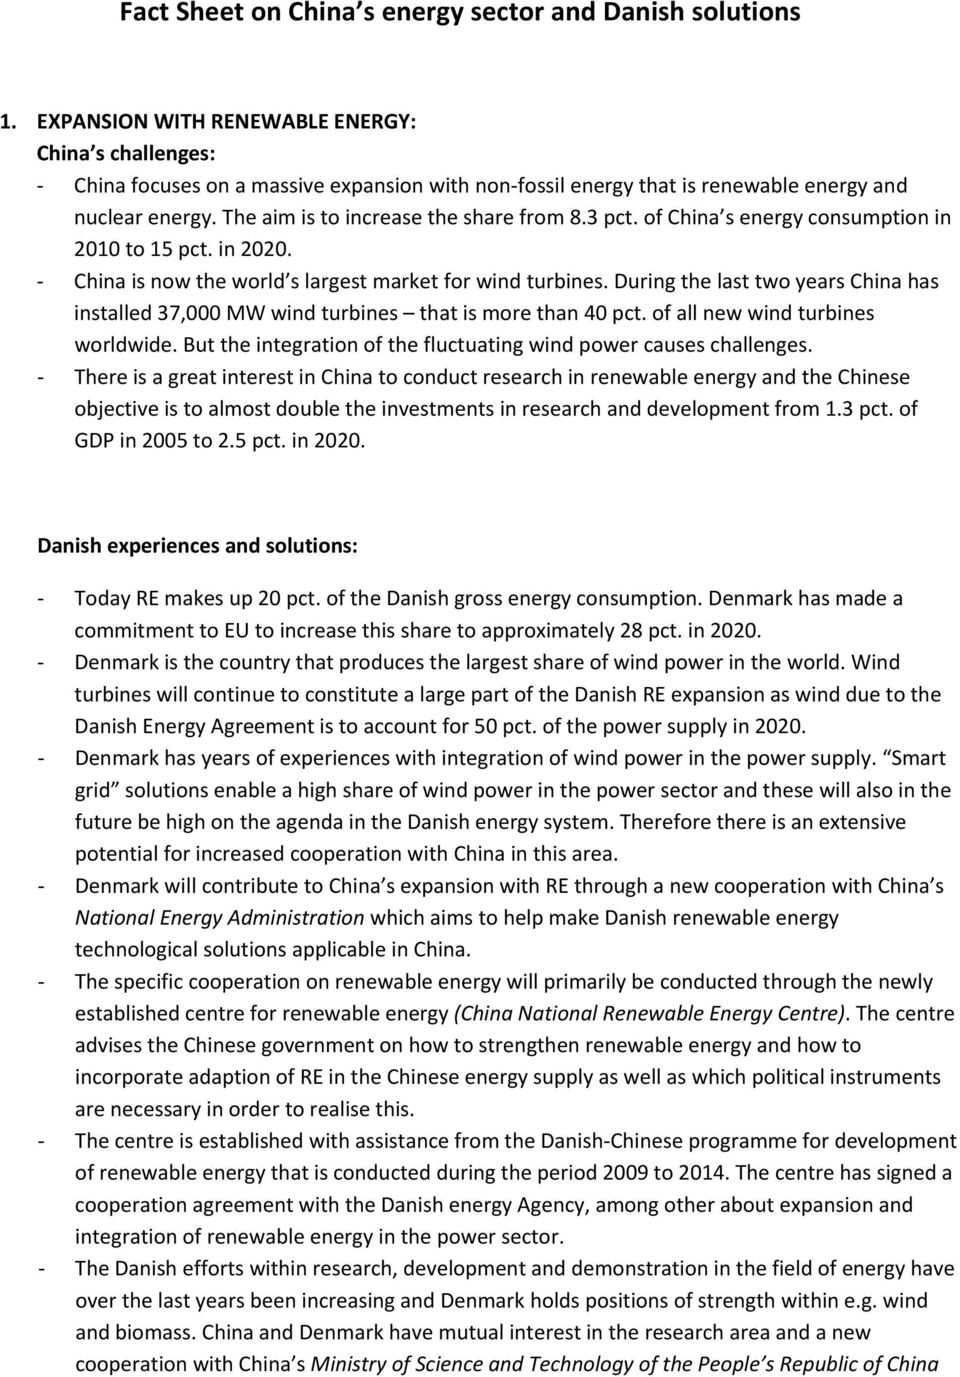 During the last two years China has installed 37,000 MW wind turbines that is more than 40 pct. of all new wind turbines worldwide. But the integration of the fluctuating wind power causes challenges.